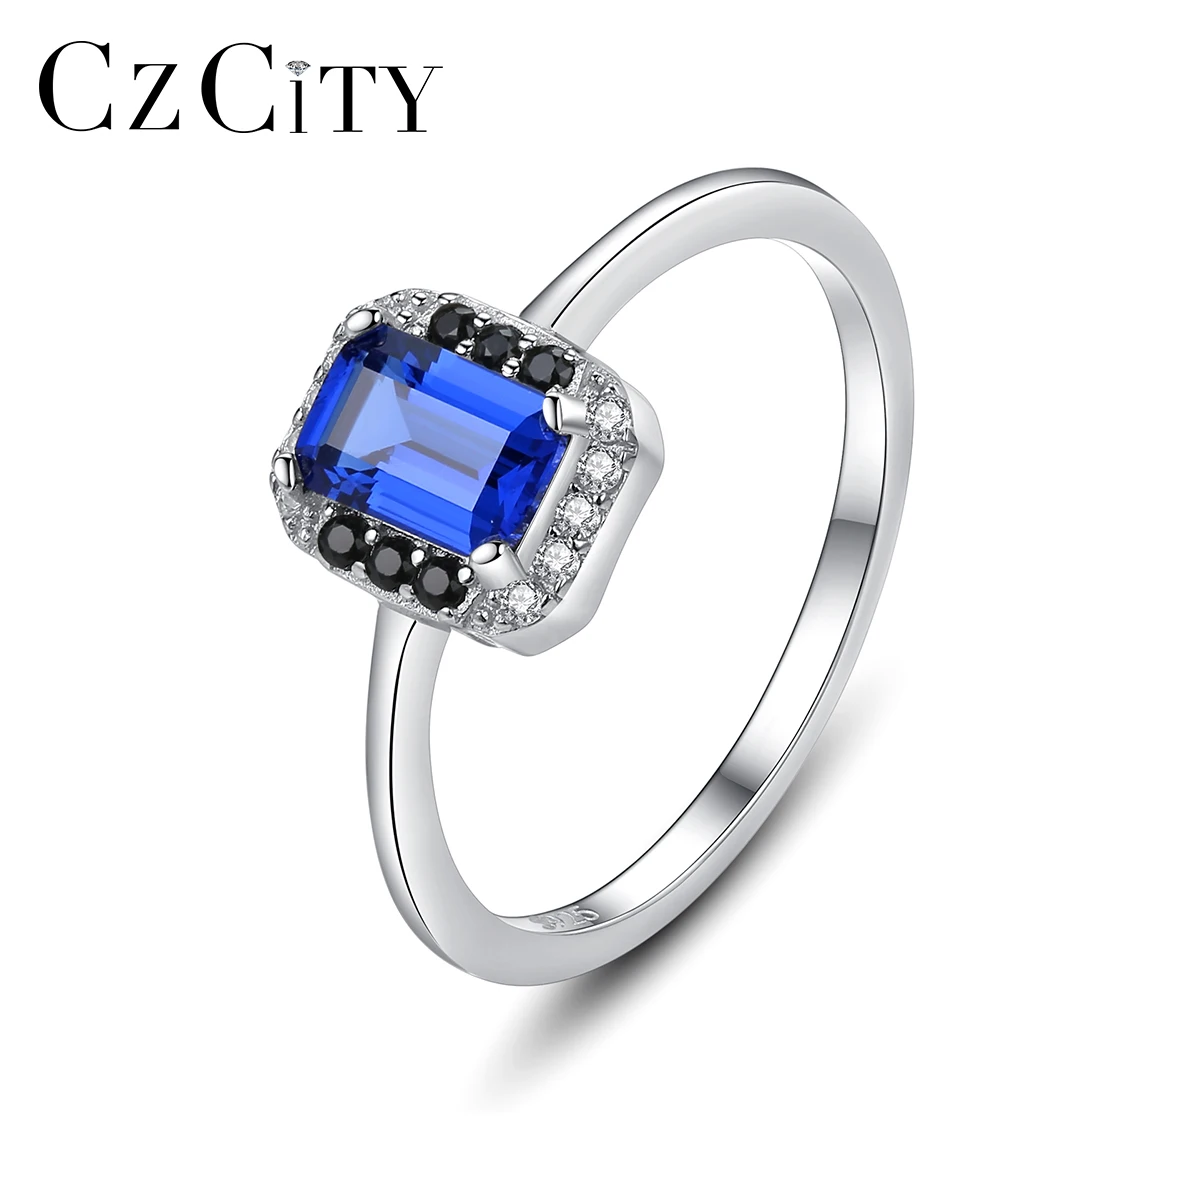 

CZCITY Blue Topaz Finger Ring Gemstone Fashion Sapphire925 Sterling Silver Ring for Ladies